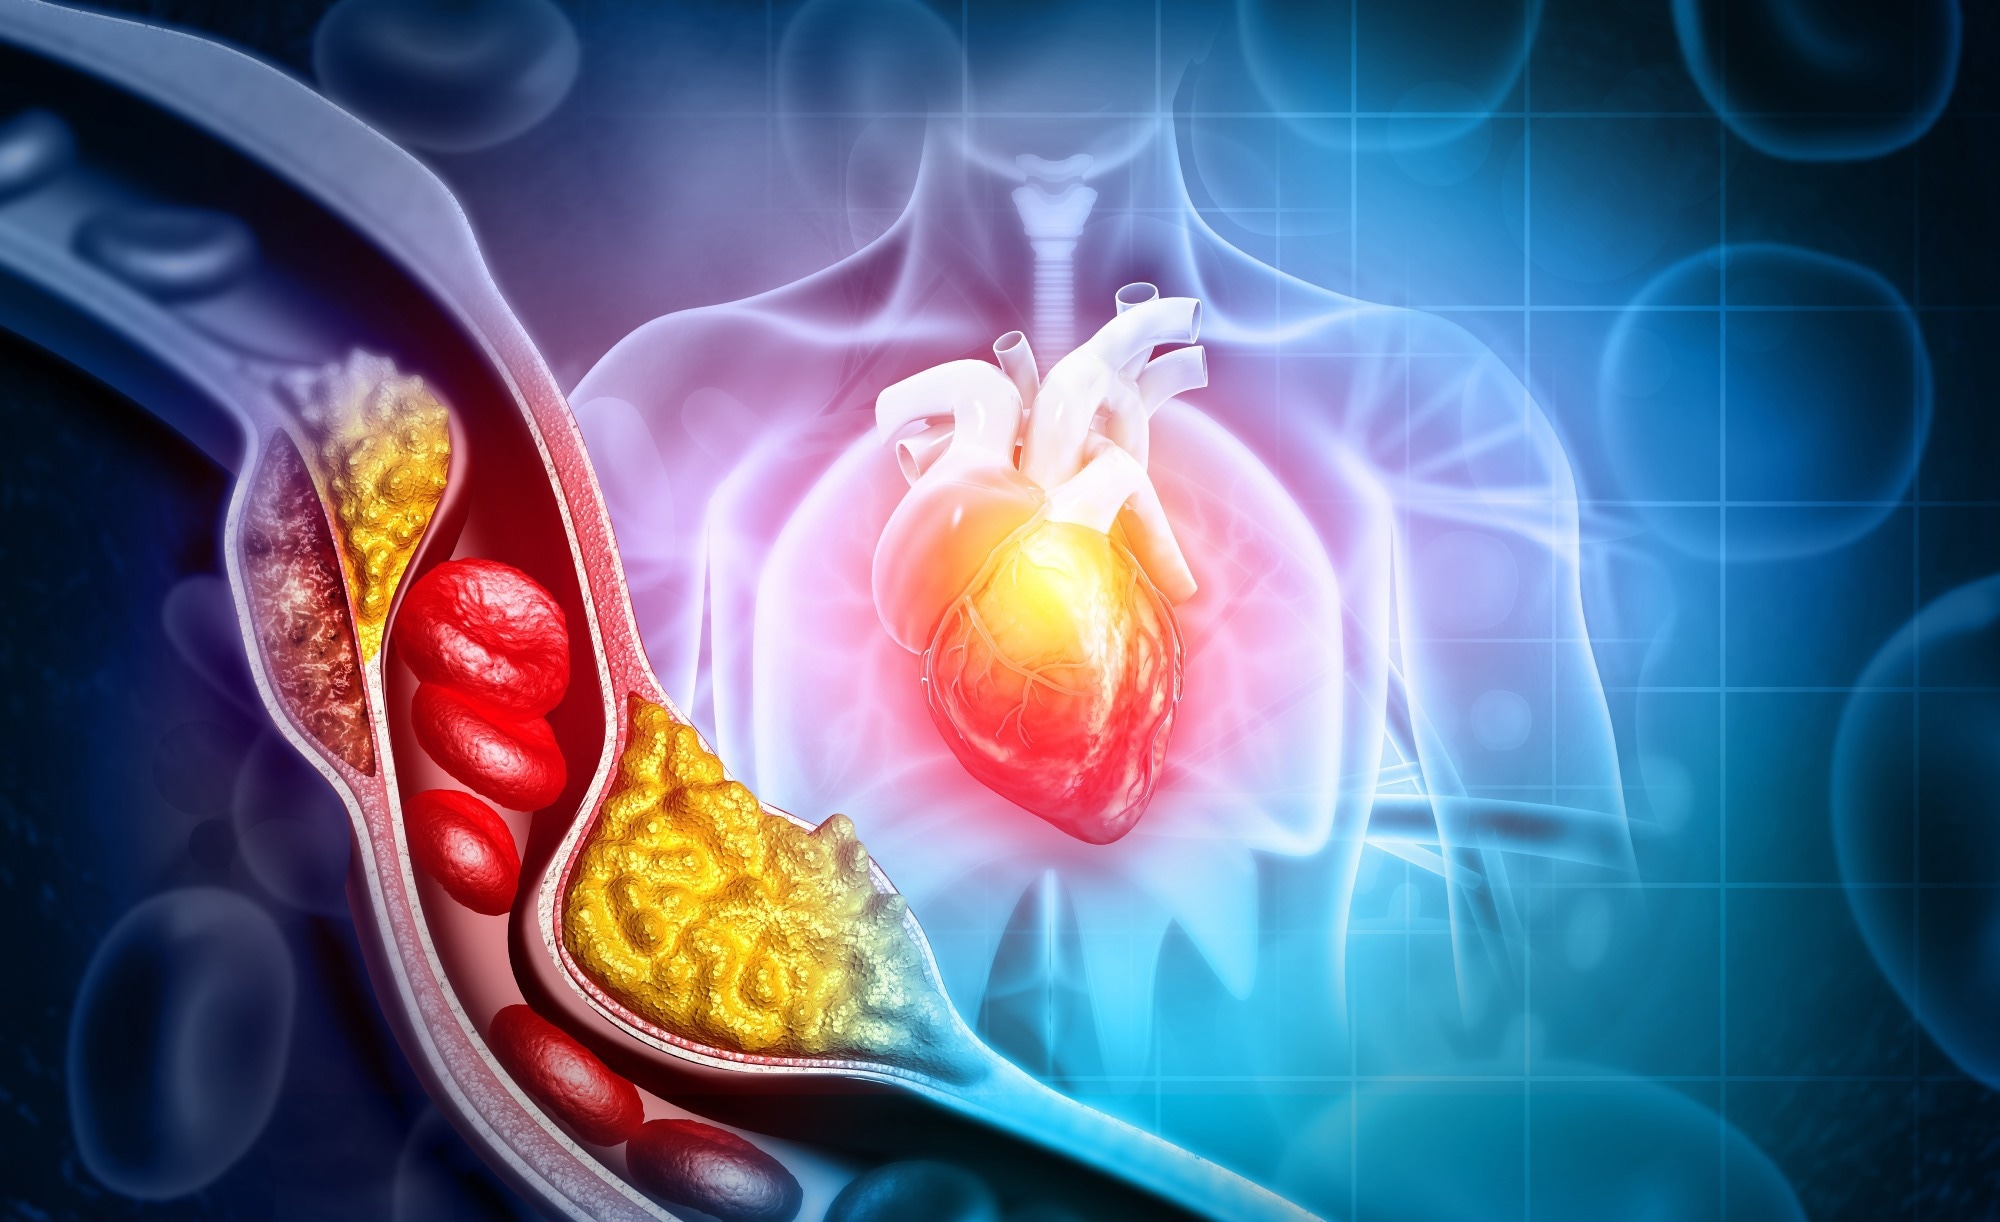 Study: Changes in total cholesterol level and cardiovascular disease risk among type 2 diabetes patients. Image Credit: crystal light / Shutterstock